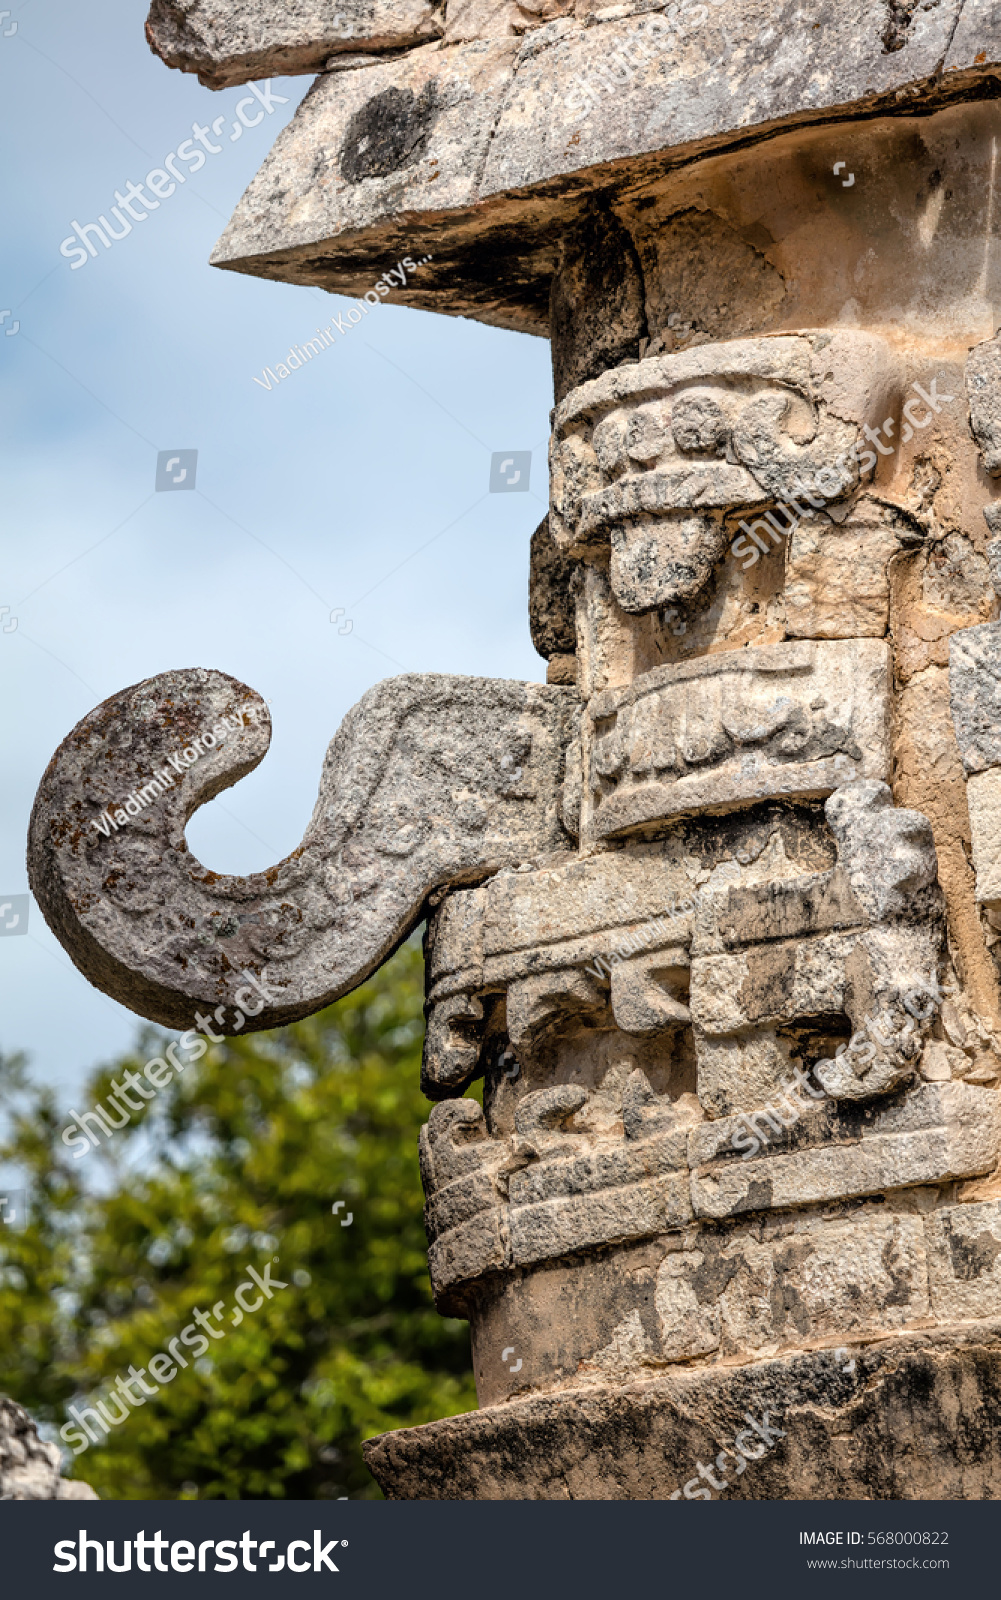 Three-dimensional mask on the edge of the Nunnery Annex building in Chichen Itza, believed to be the Ancient Mayan god of rain and lightning Chac. #568000822